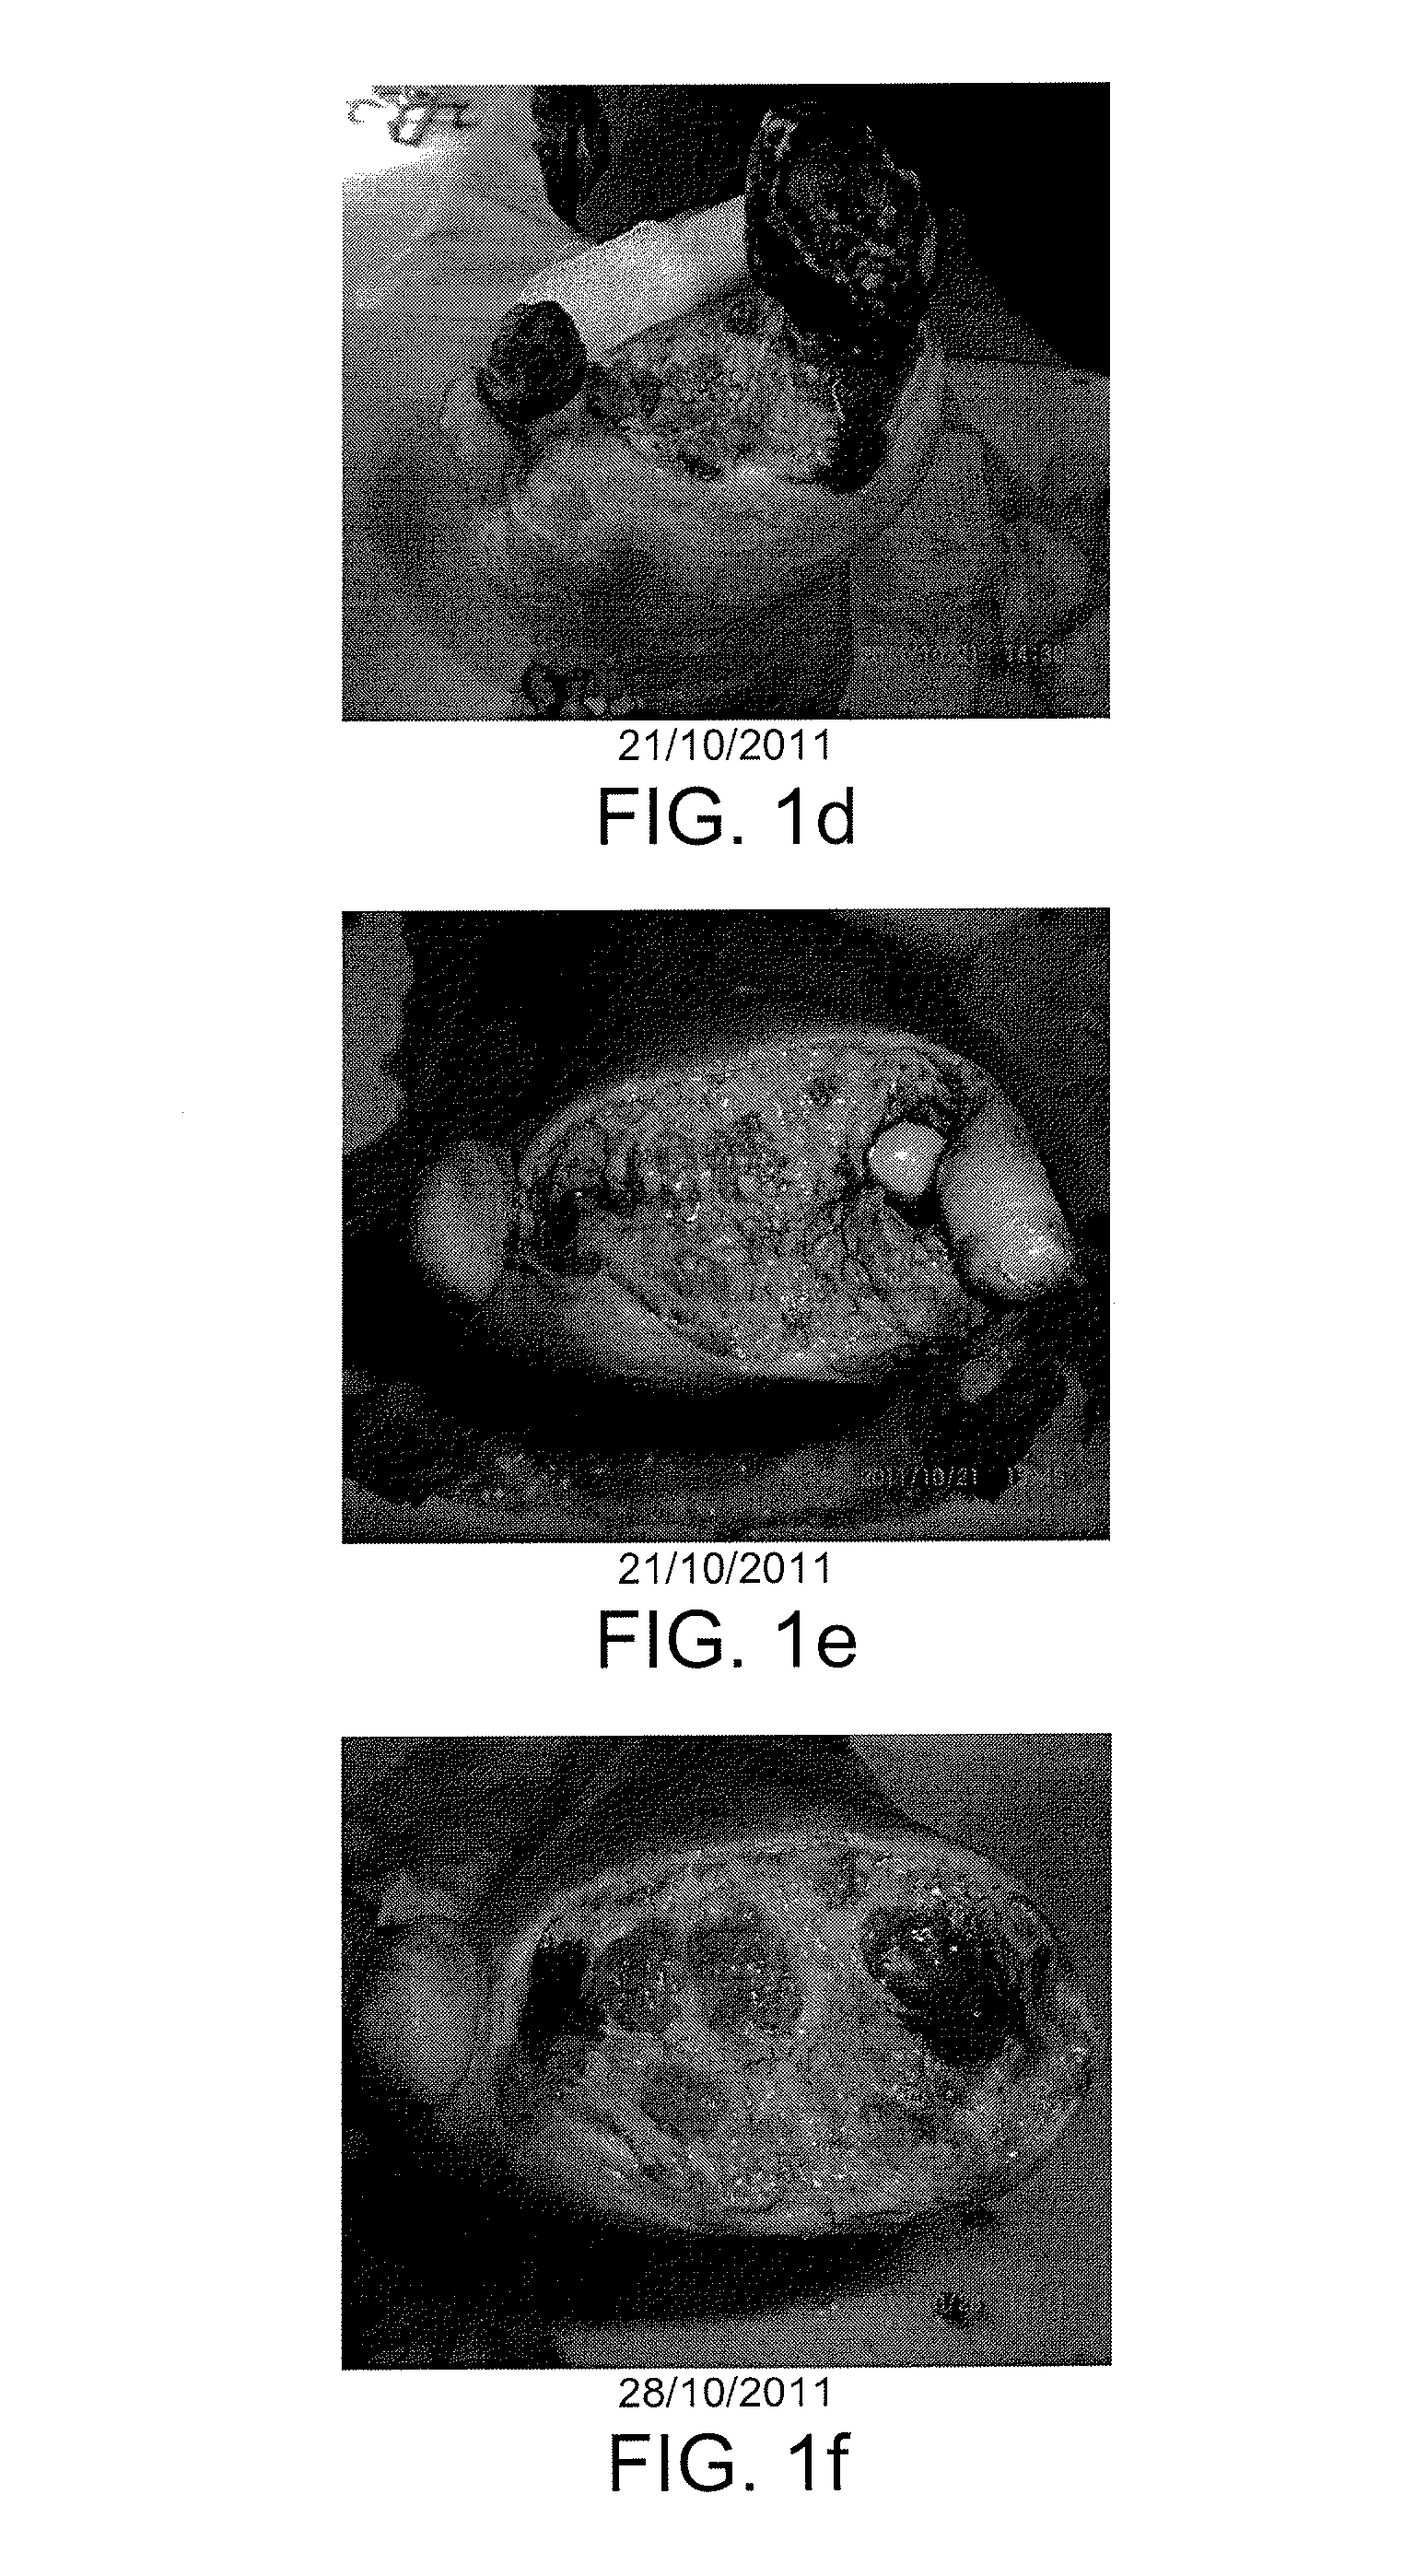 Compositions for the debridement, granulation and reepithelialization of wounds in man